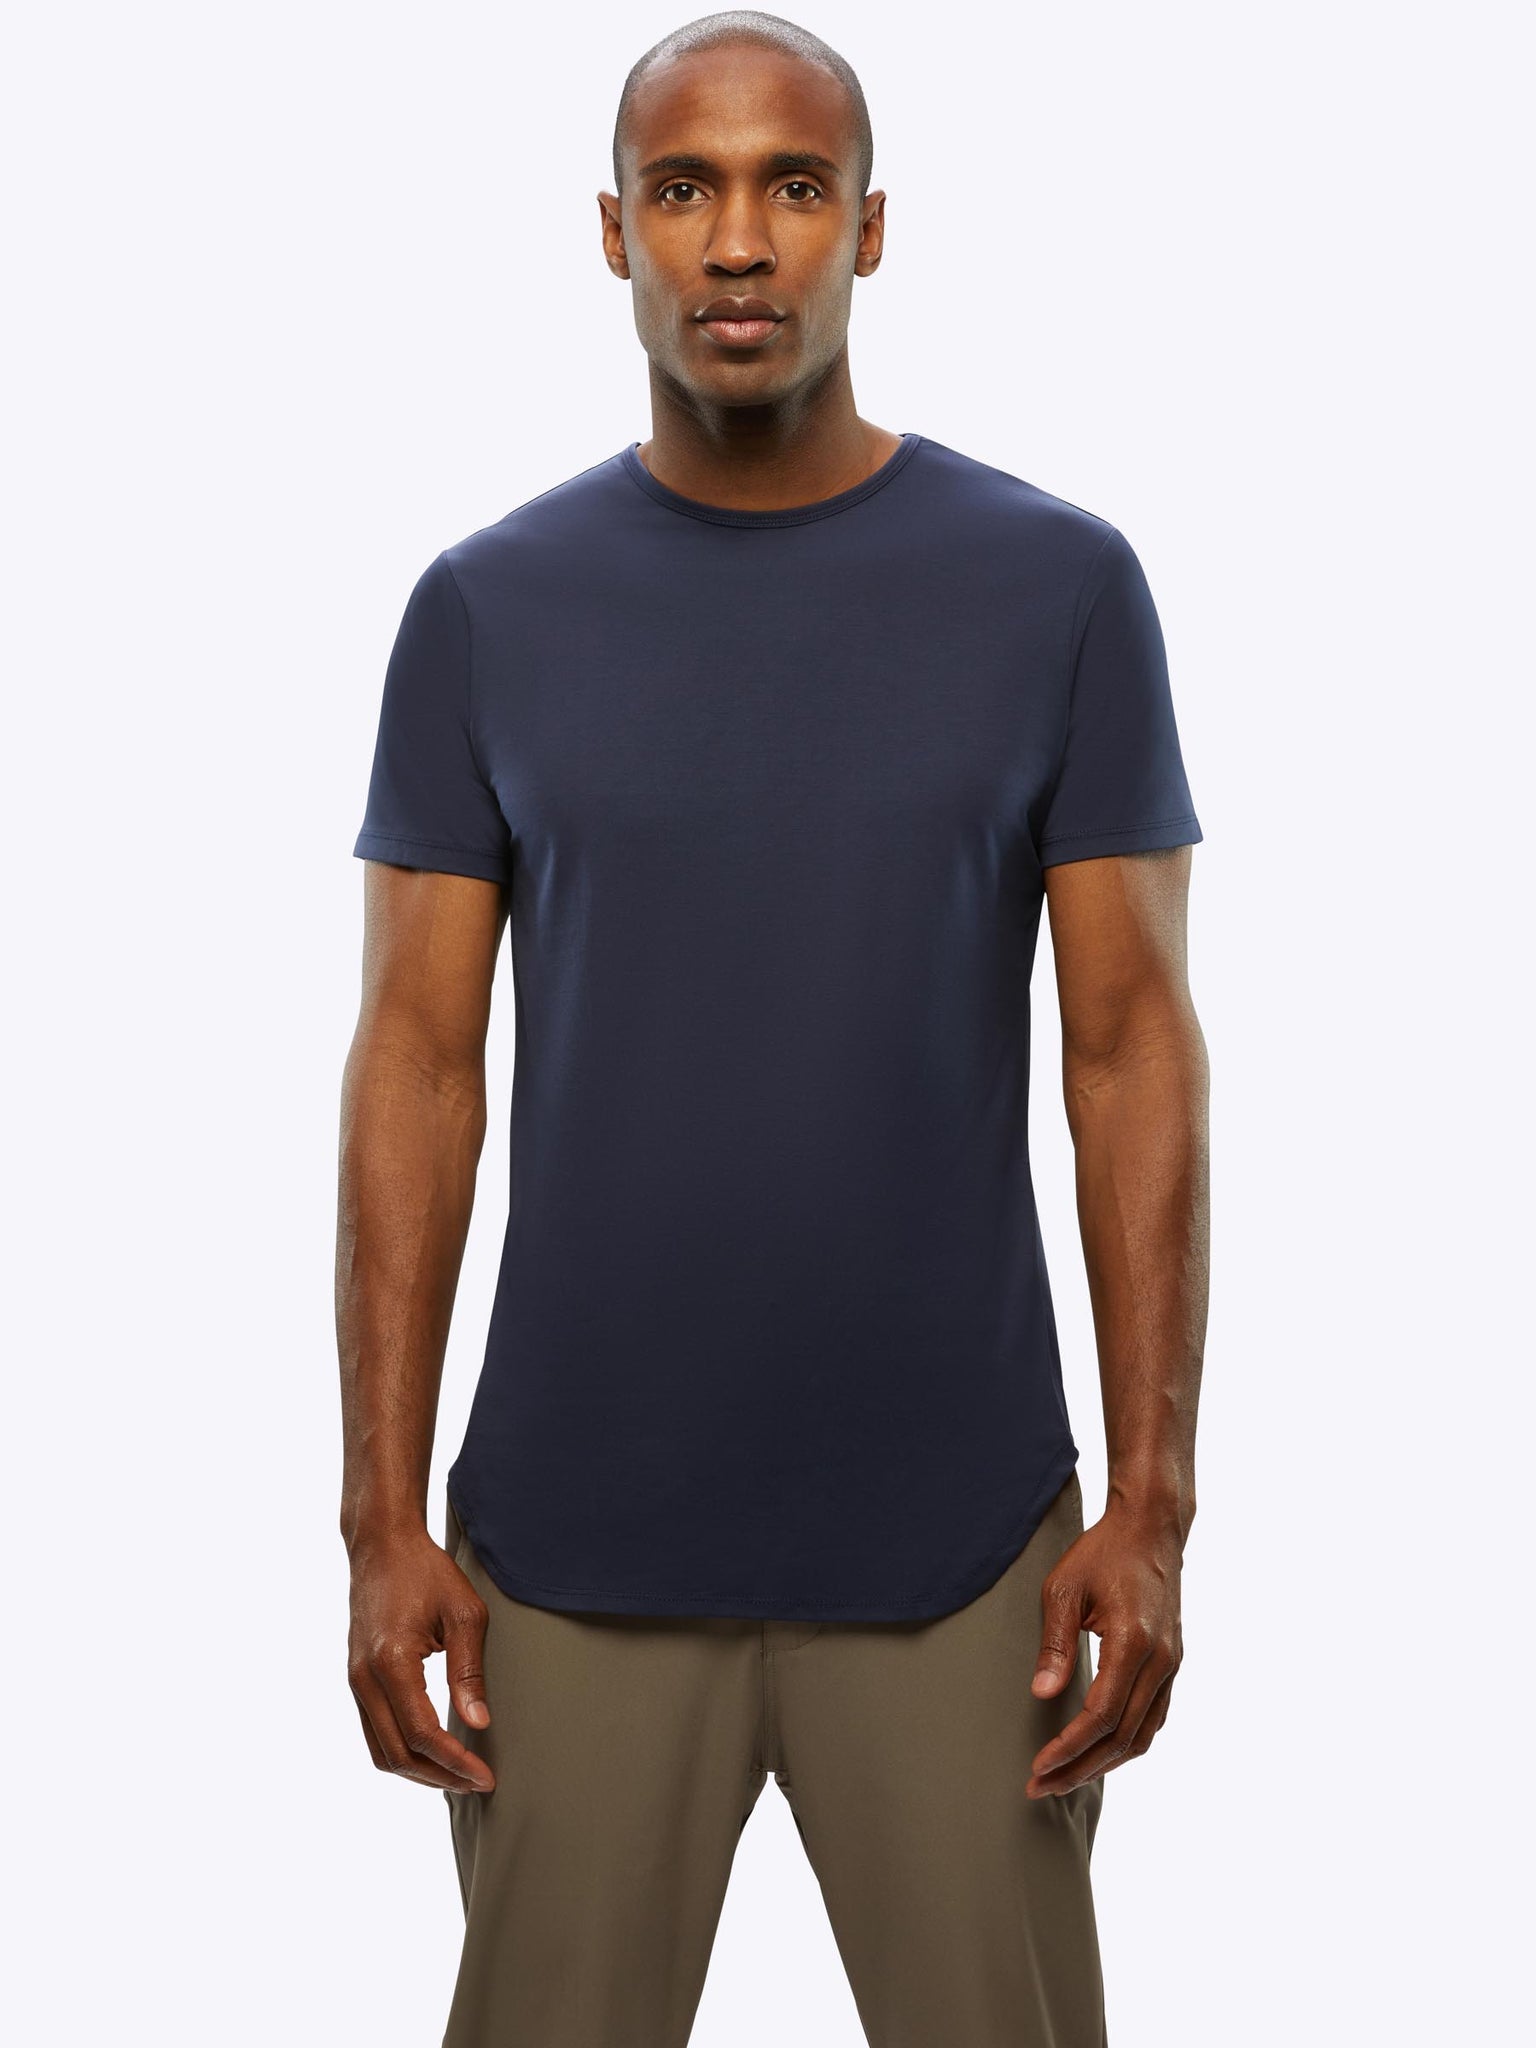 AO Elongated Tee | Pacific Blue Signature-fit PYCA Pro®